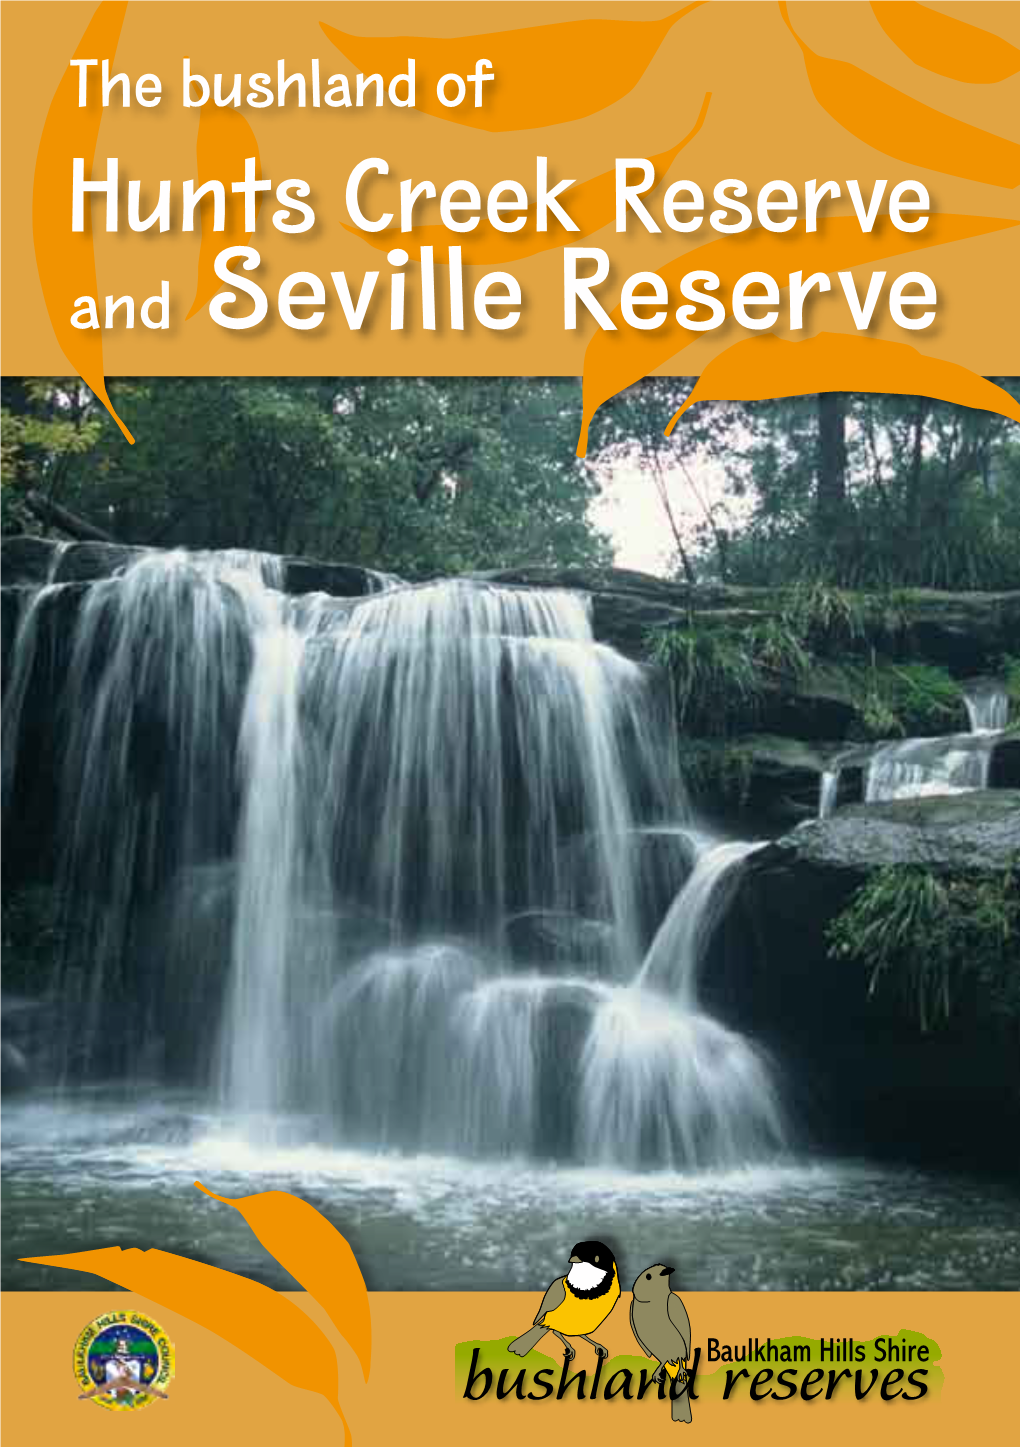 And Seville Reserve